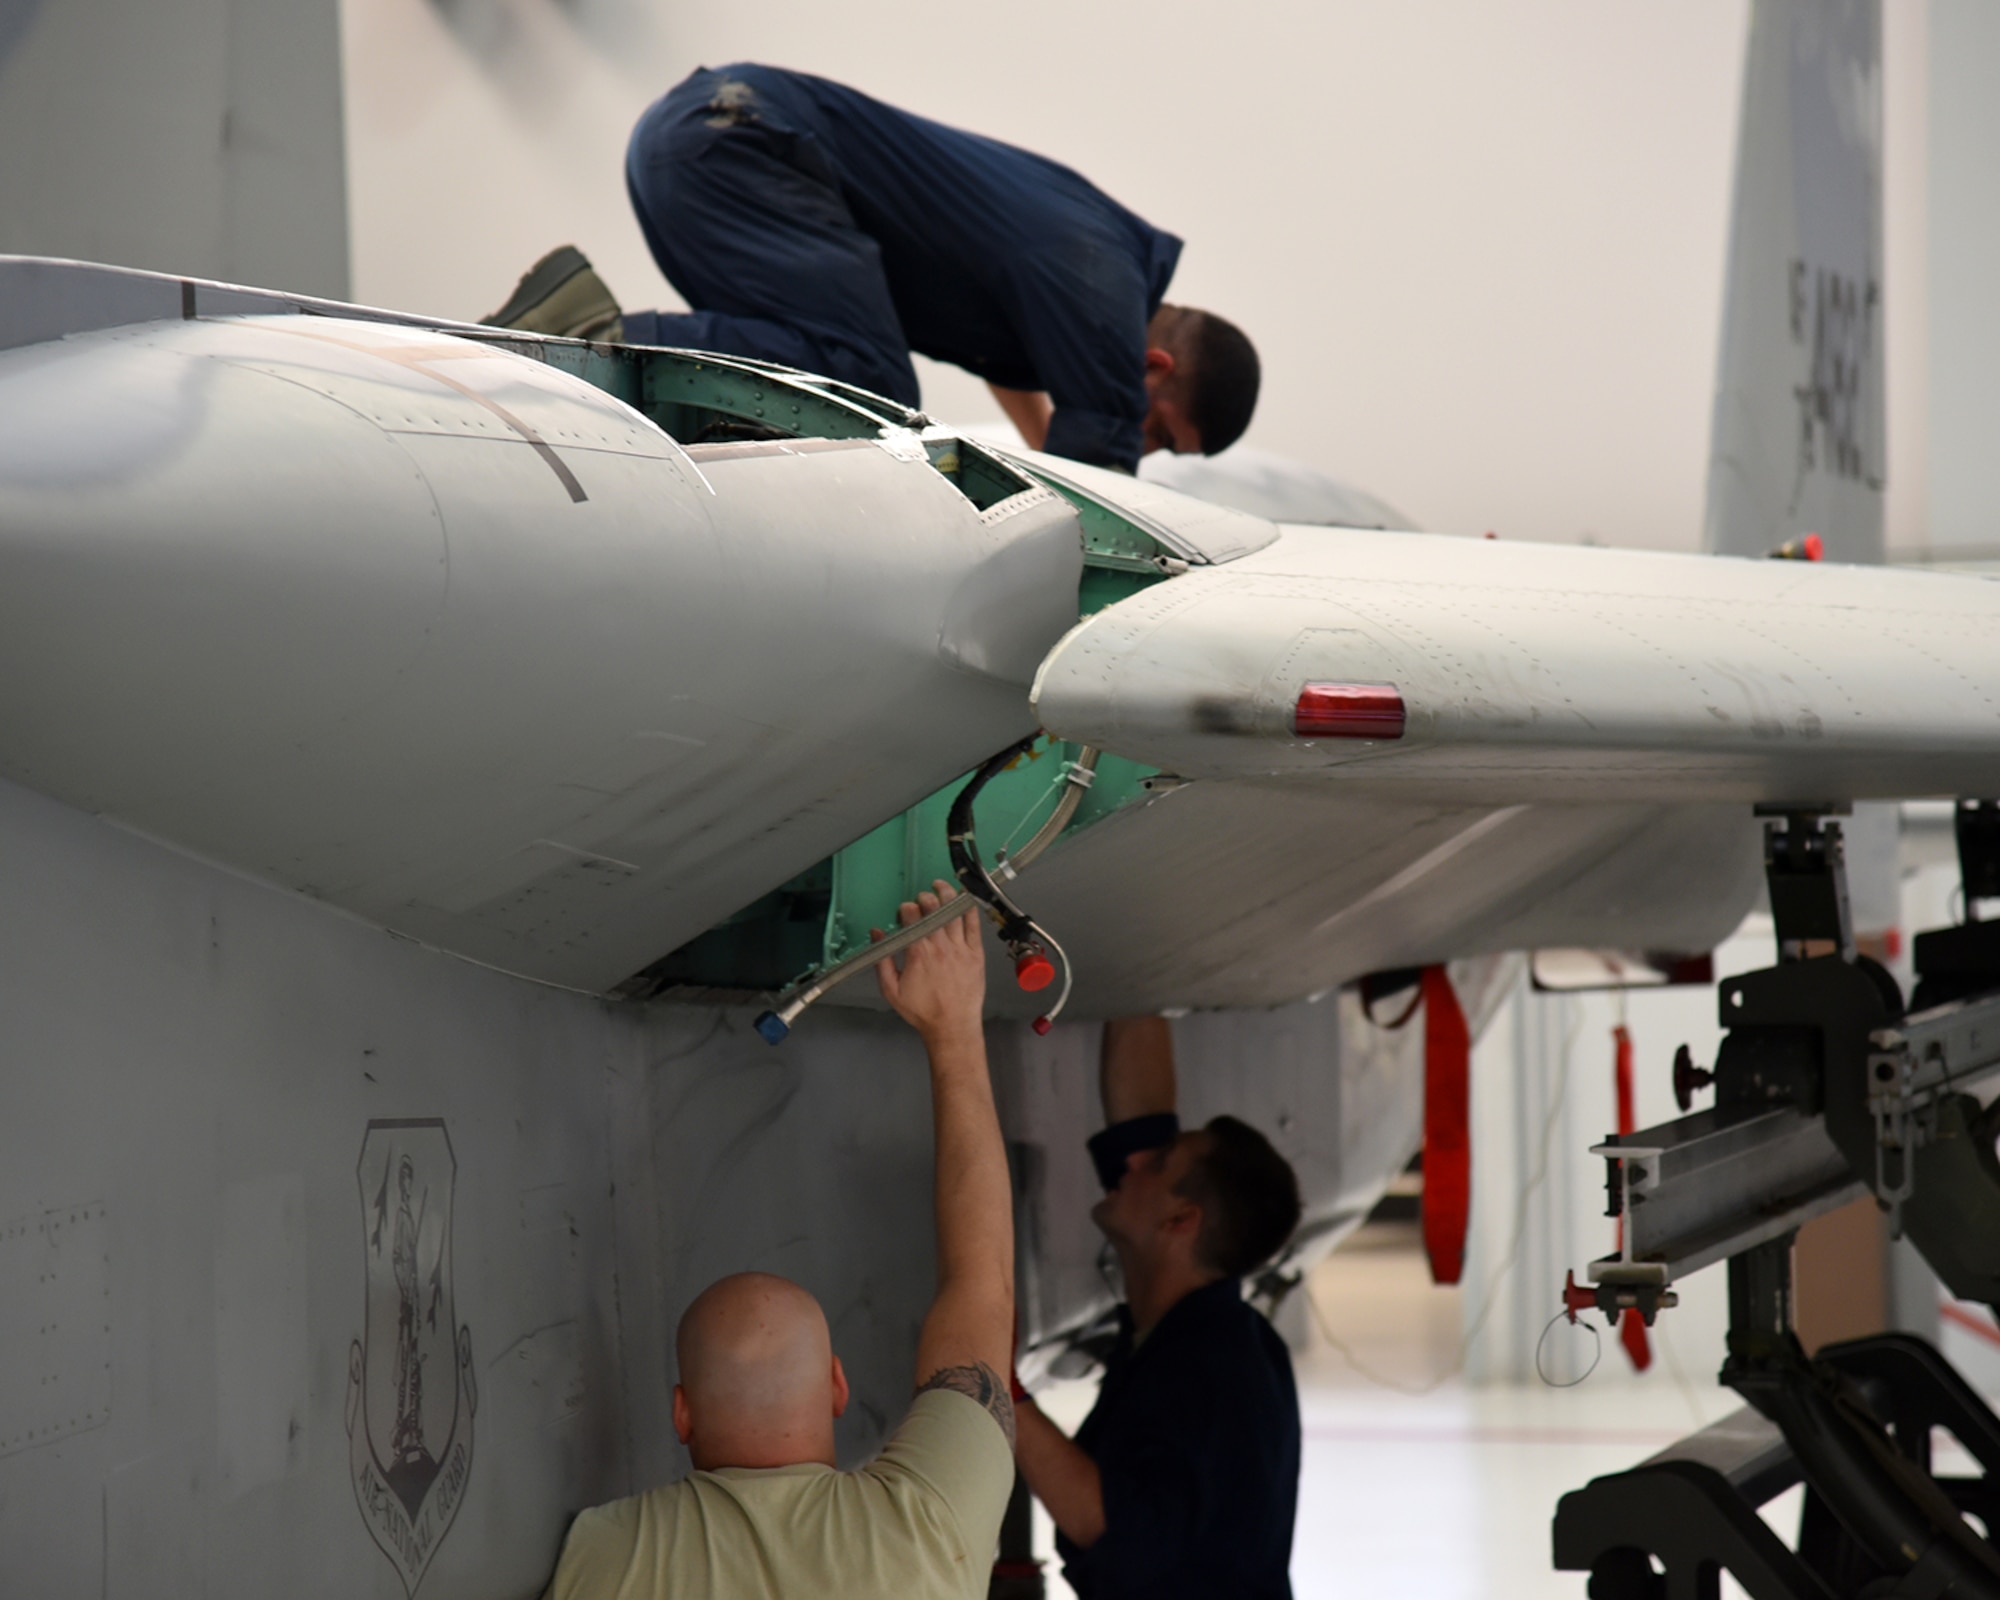 The Depot Field Team from the 402nd Aircraft Maintenance Group, Robins Air Force Base, Ga., attaches a new wing to F-15C Eagle 78-482, assigned to the 142nd Fighter Wing, Portland Air National Guard Base, Ore., Dec. 6, 2016. (U.S. Air National Guard photo by Senior Master Sgt. Shelly Davison, 142nd Fighter Wing Public Affairs)

